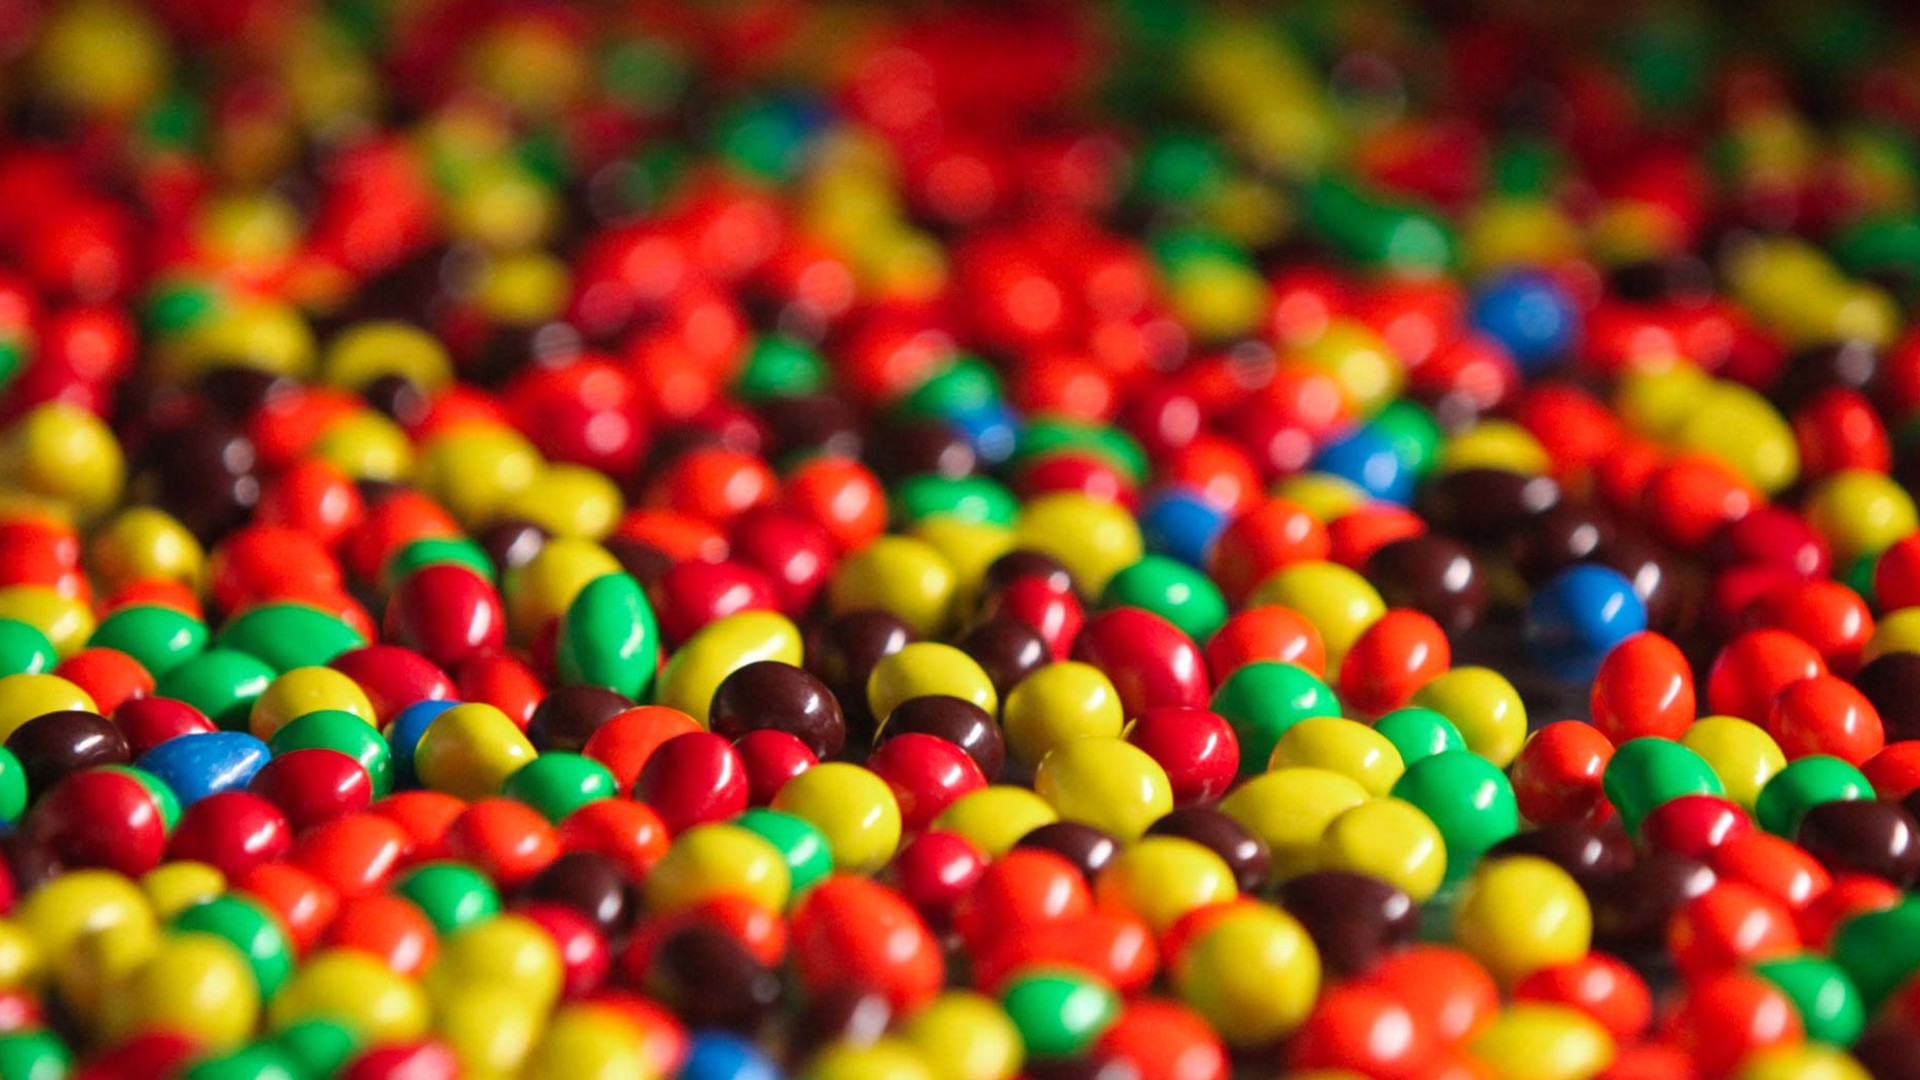 1920x1080, Awesome Mm Candy Images › Mm Candy Wallpapers - Candy Wallpaper M&m - HD Wallpaper 